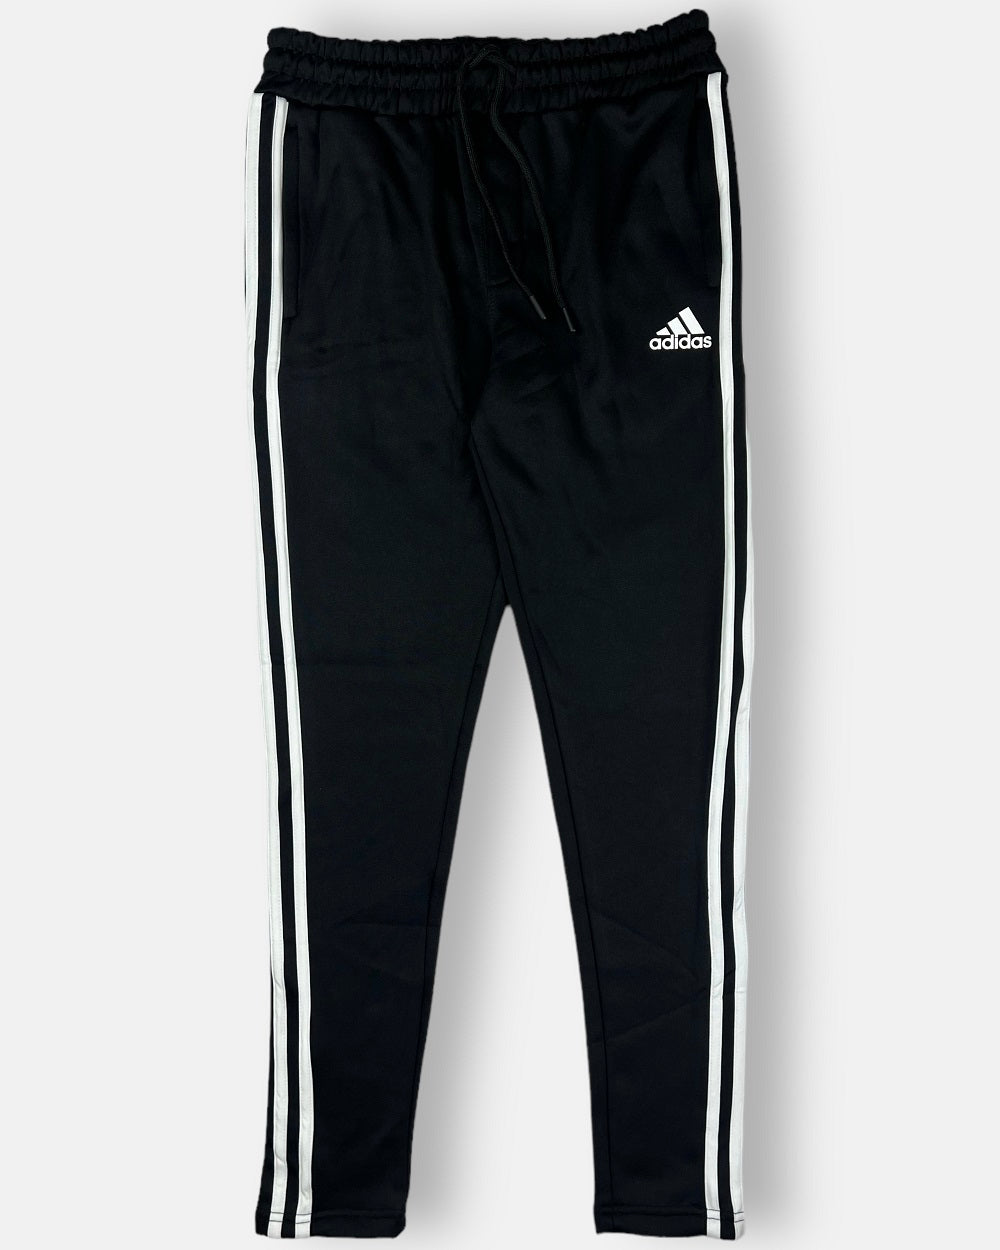 Addas Imported polyester Fleece Tracksuit (White & Black)